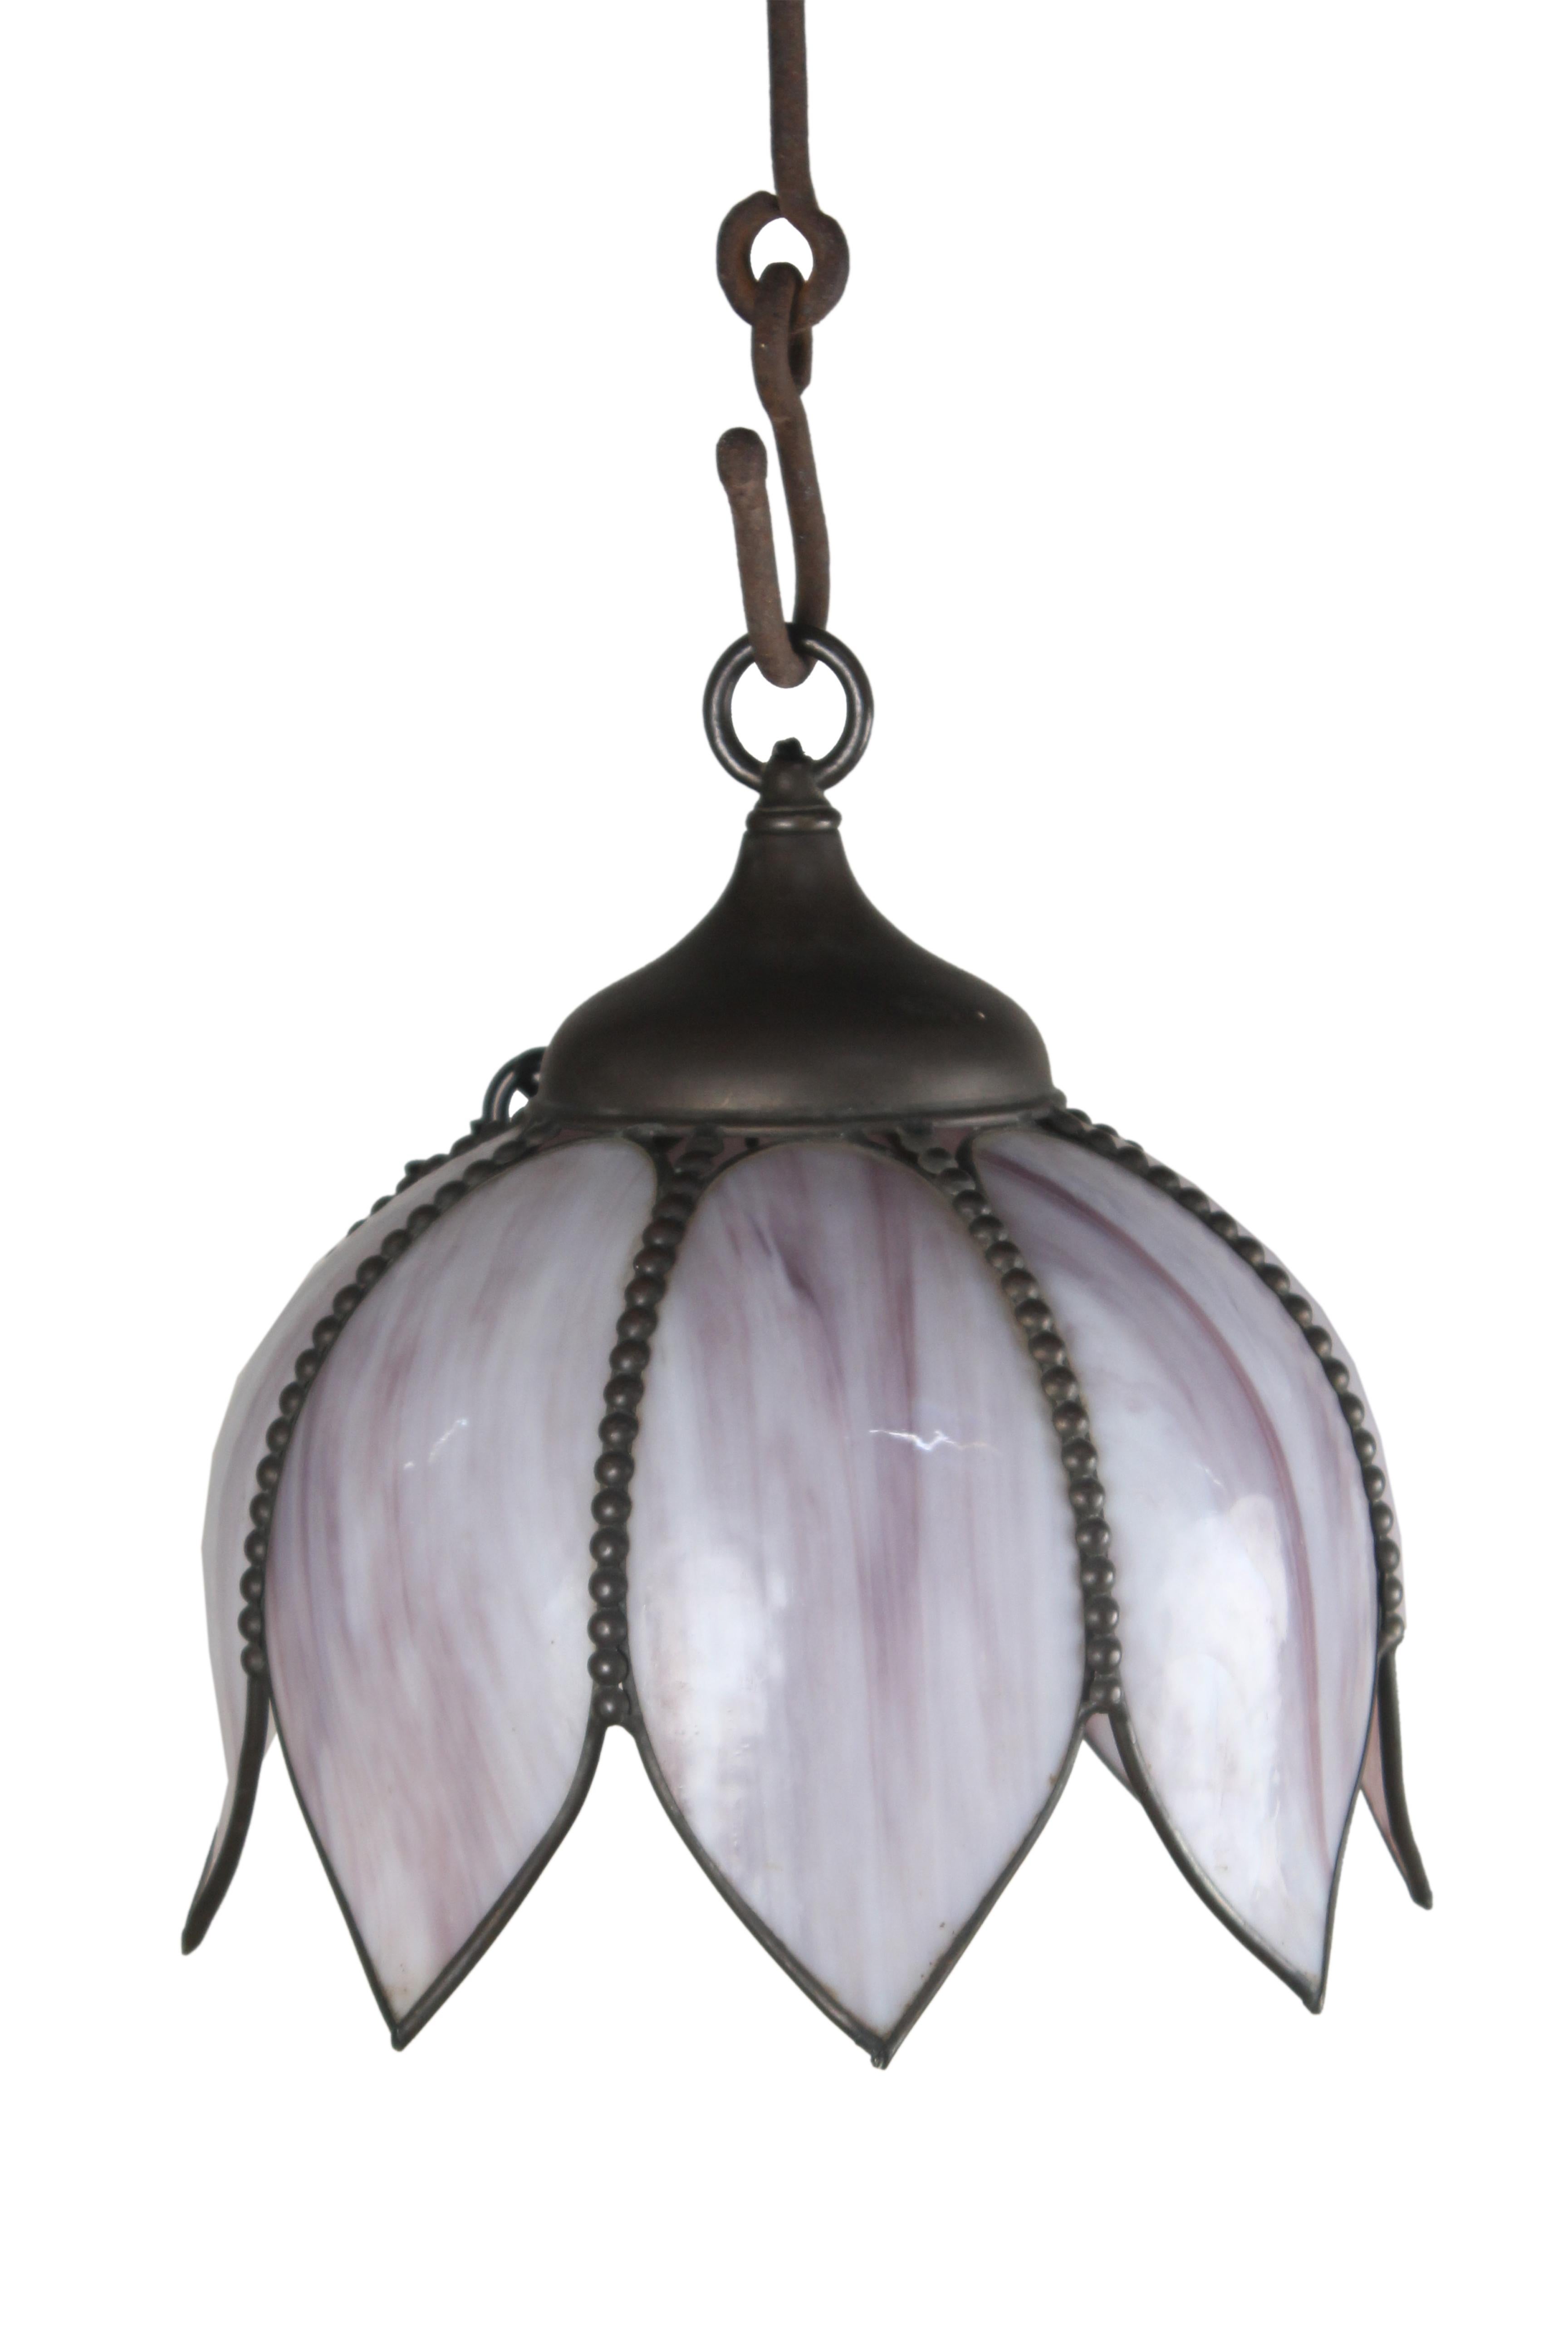 A lovely lotus flower art glass pendant chandelier light fixture with pink slag glass petals, in excellent condition. Beaded brass borders and hardware. Hangs from a 3' brass rod, or could be switched to brass chain if preferred. Rewired and takes a